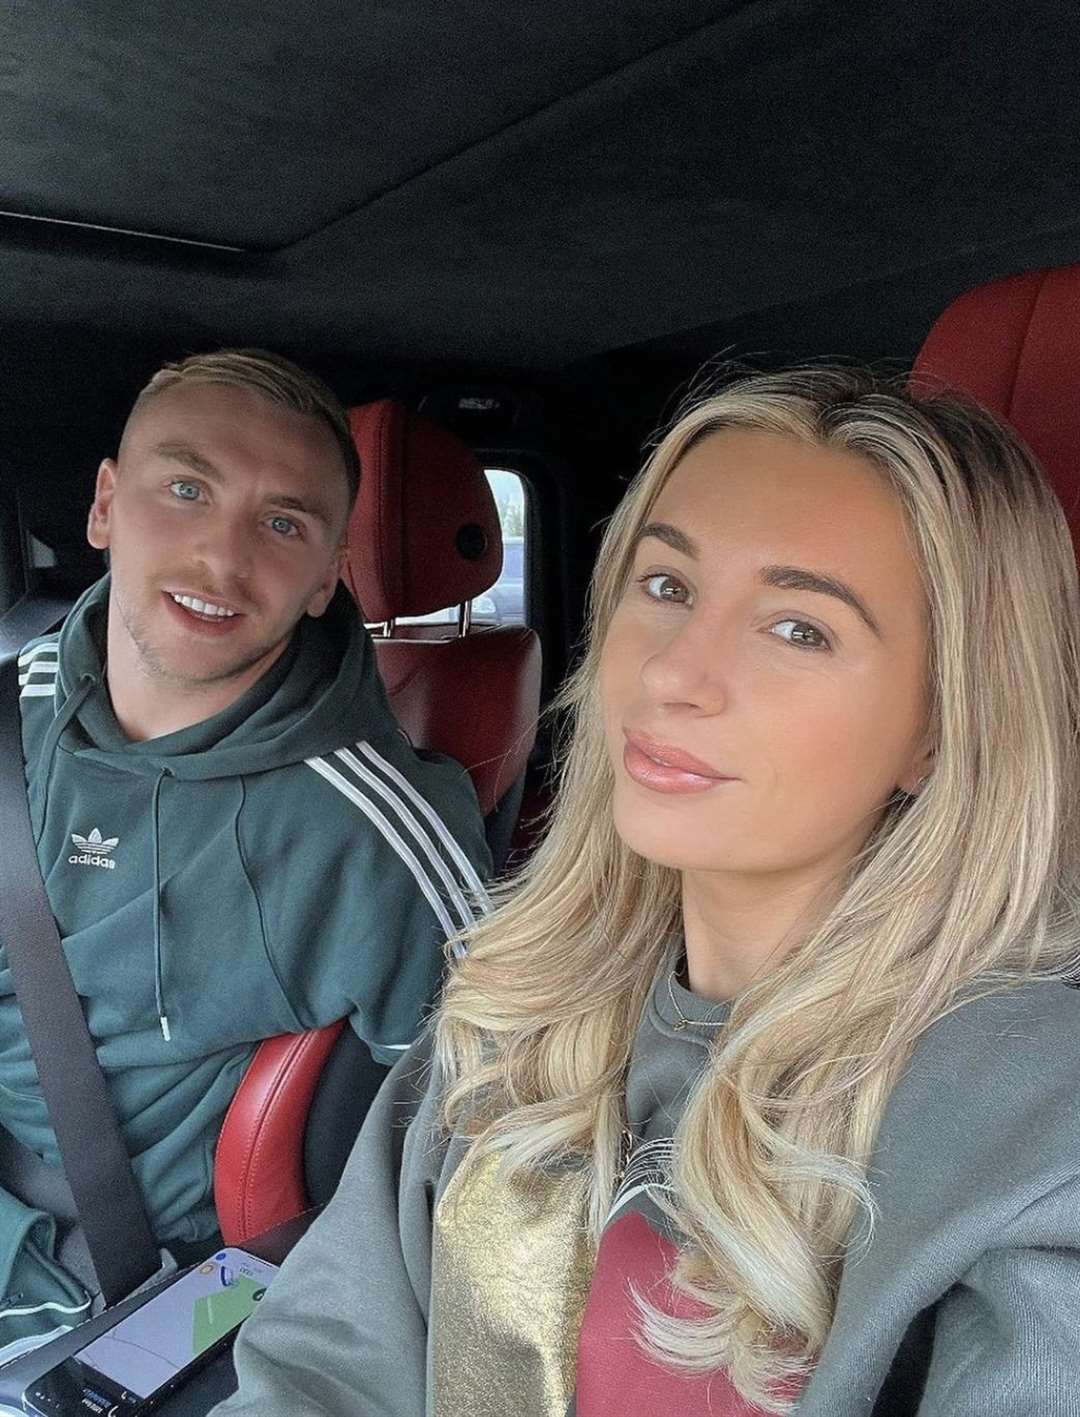 Premier League ace Jarrod Bowen and influencer girlfriend Dani Dyer stayed at the hotel last year. Picture: Dani Dyer/Instagram